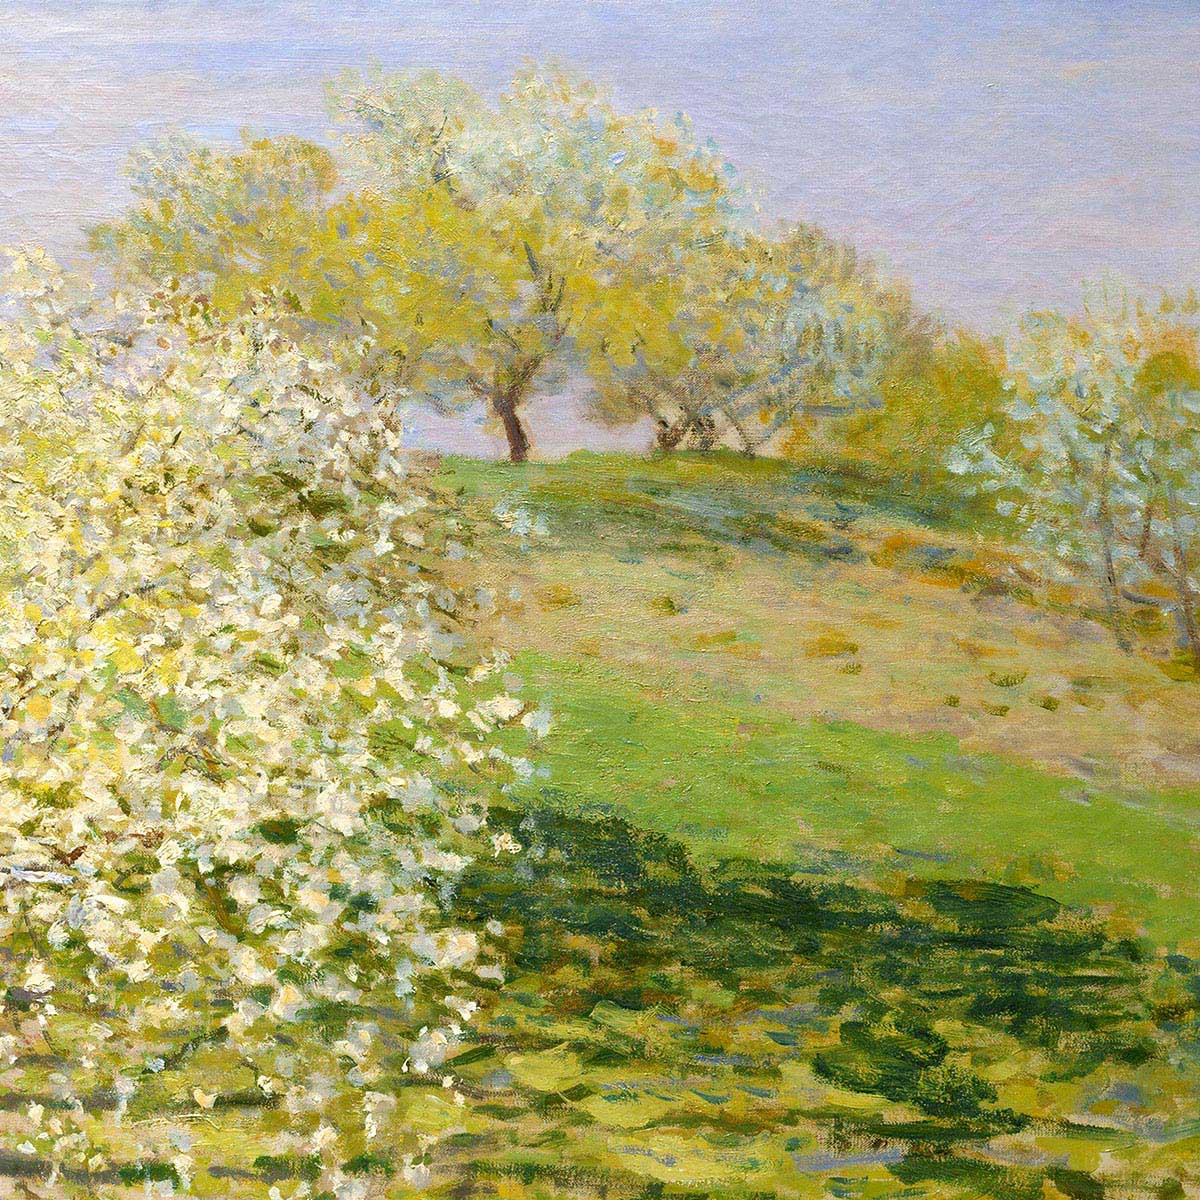 Spring, Fruit Trees in Bloom by Claude Monet Art Exhibition Poster